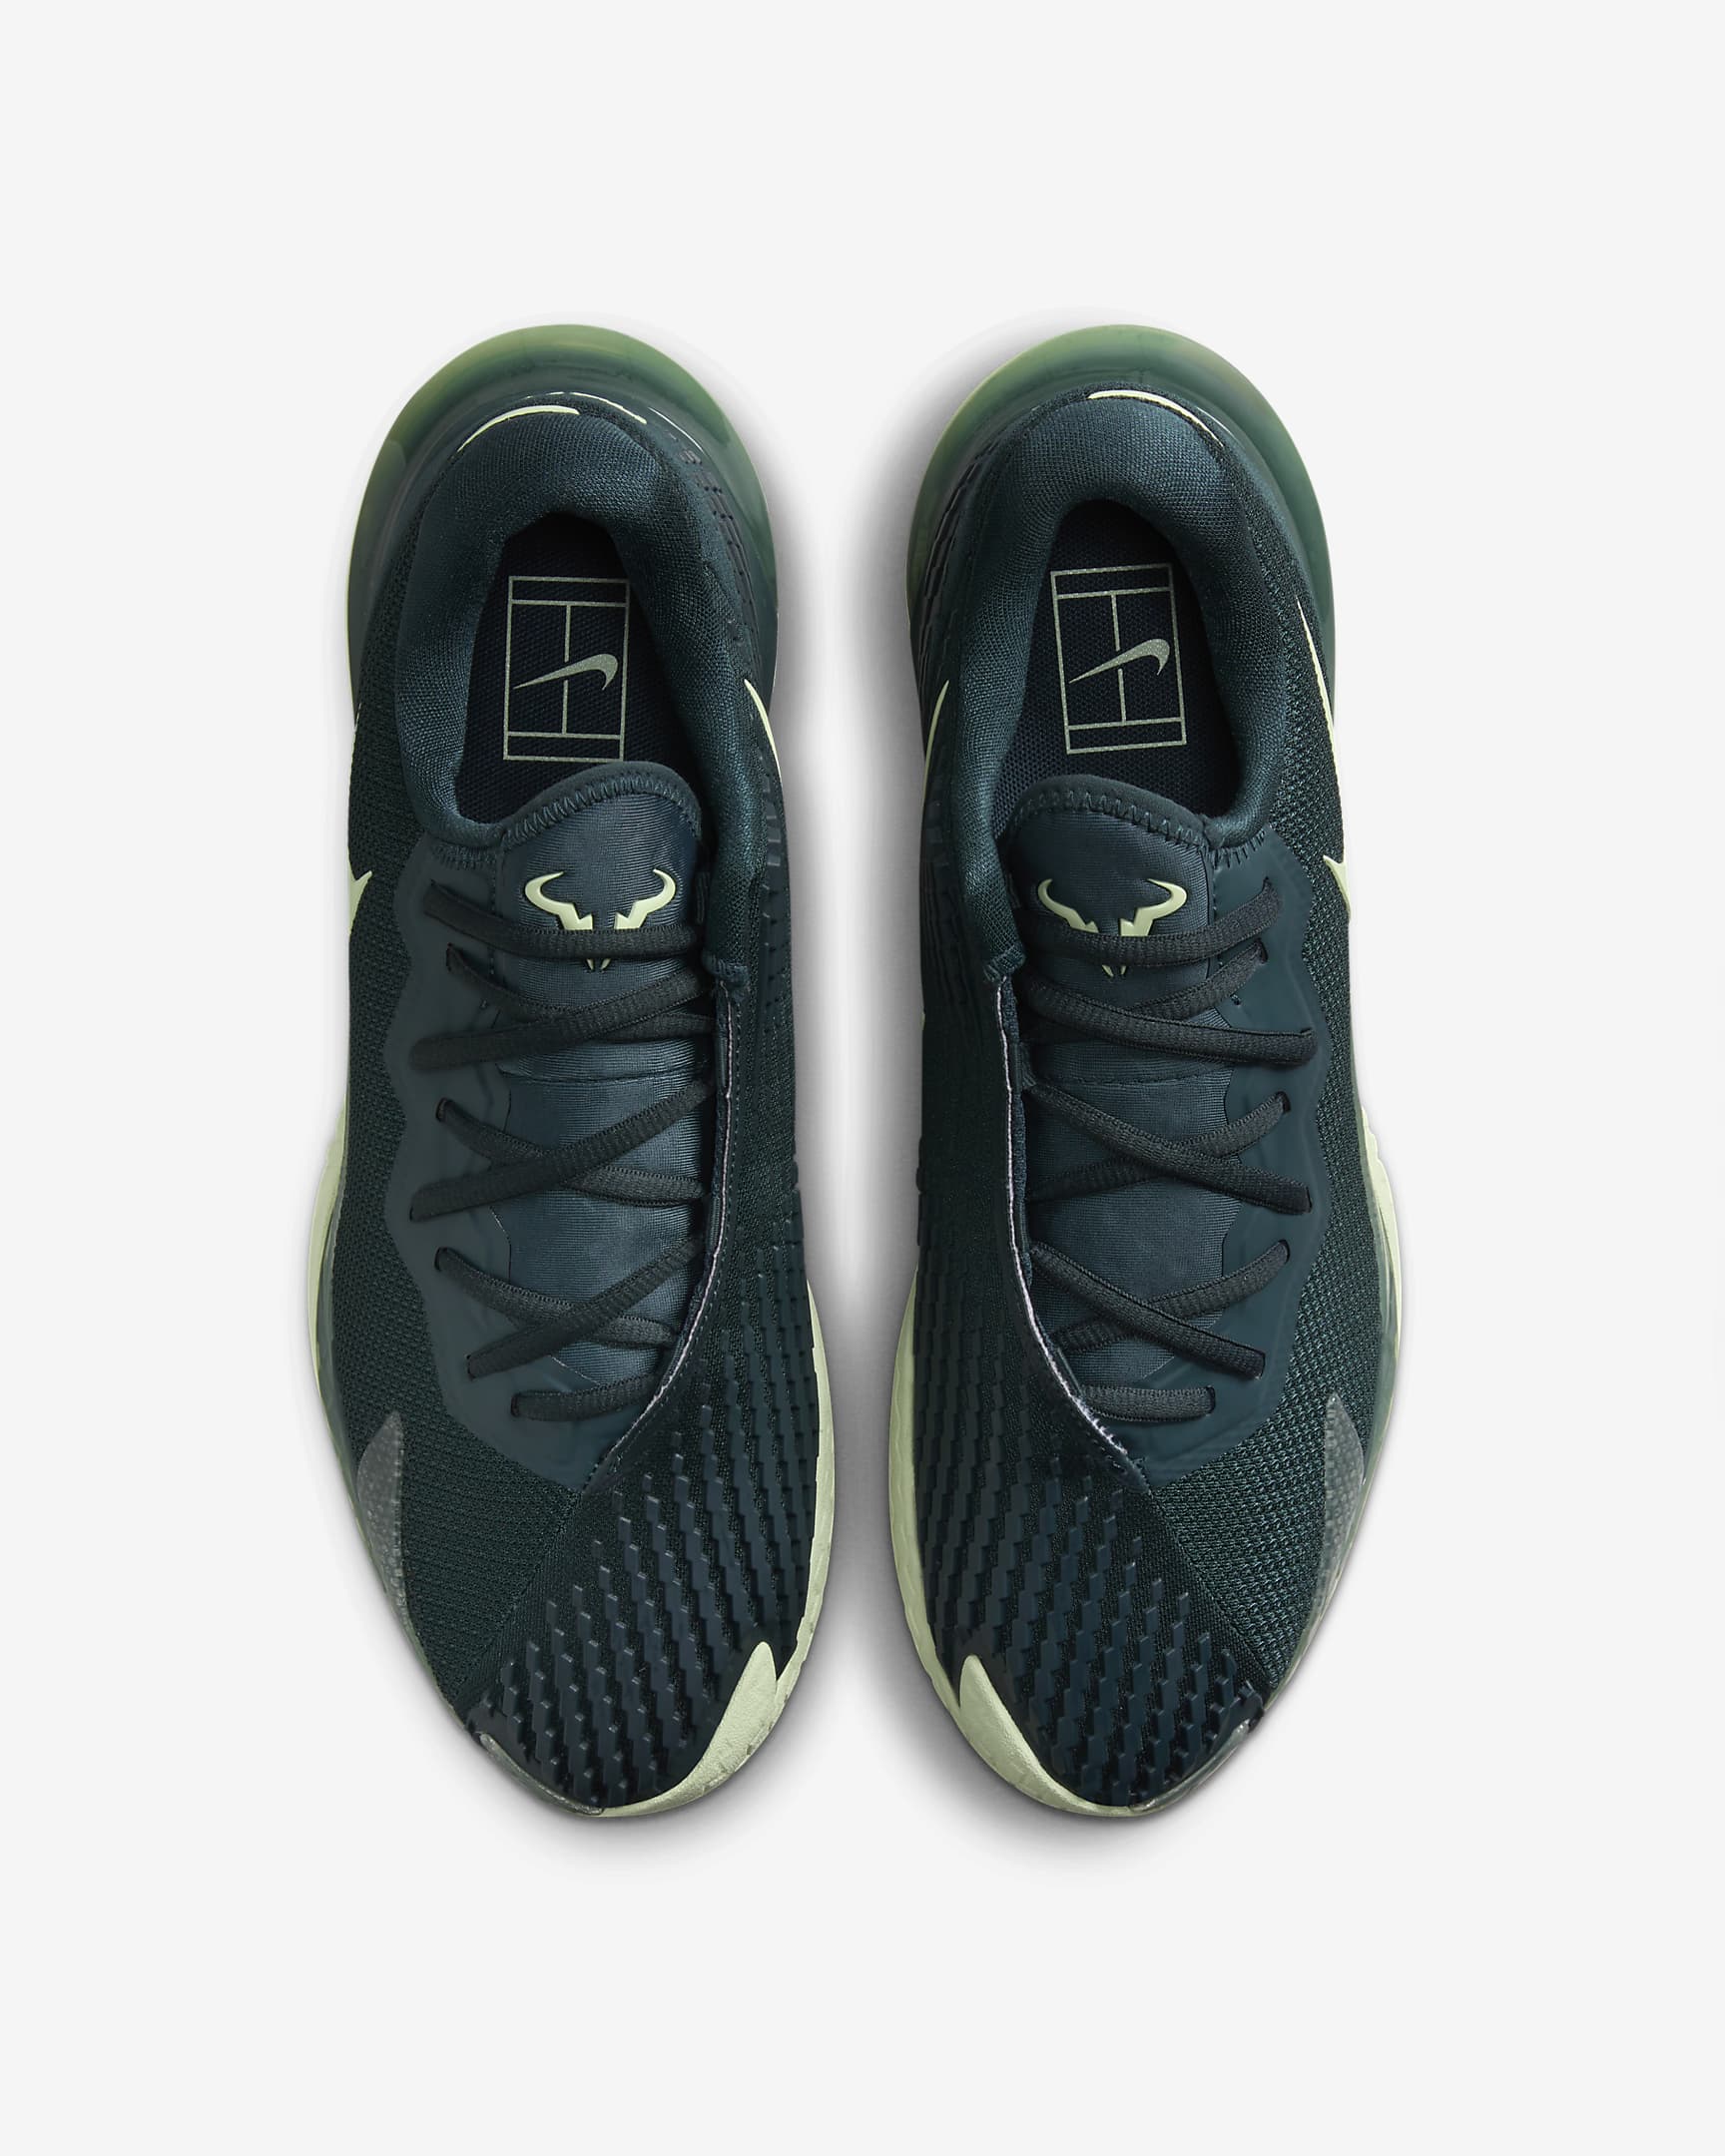 Nike Air Zoom Cage 4 Release Date ? | Page 11 | Talk Tennis